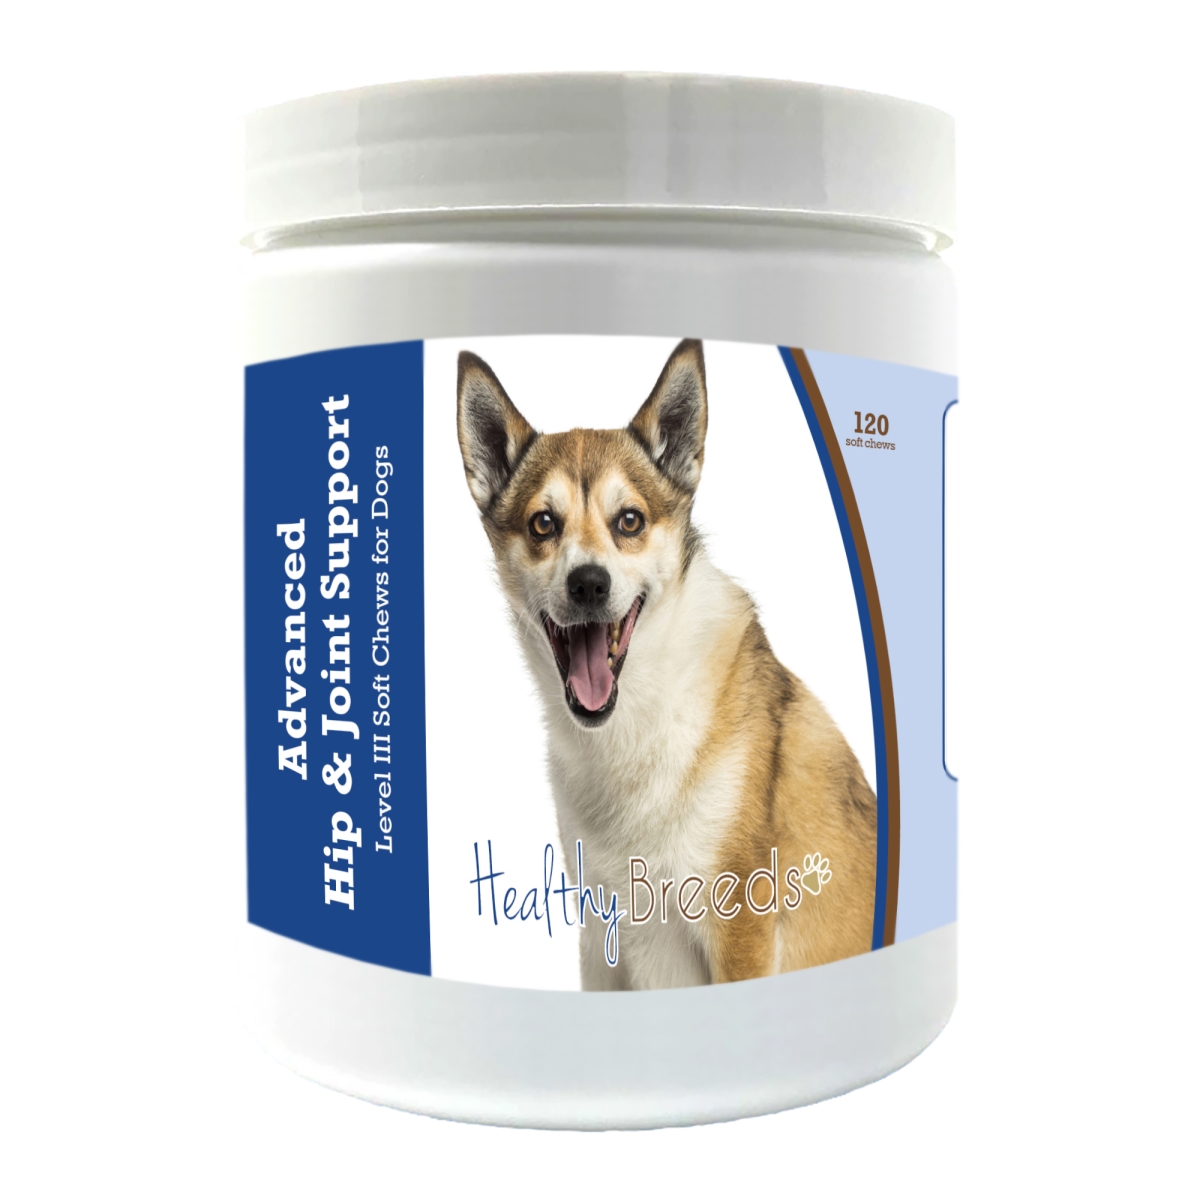 Picture of Healthy Breeds 192959898804 Norwegian Lundehund Advanced Hip & Joint Support Level III Soft Chews for Dogs